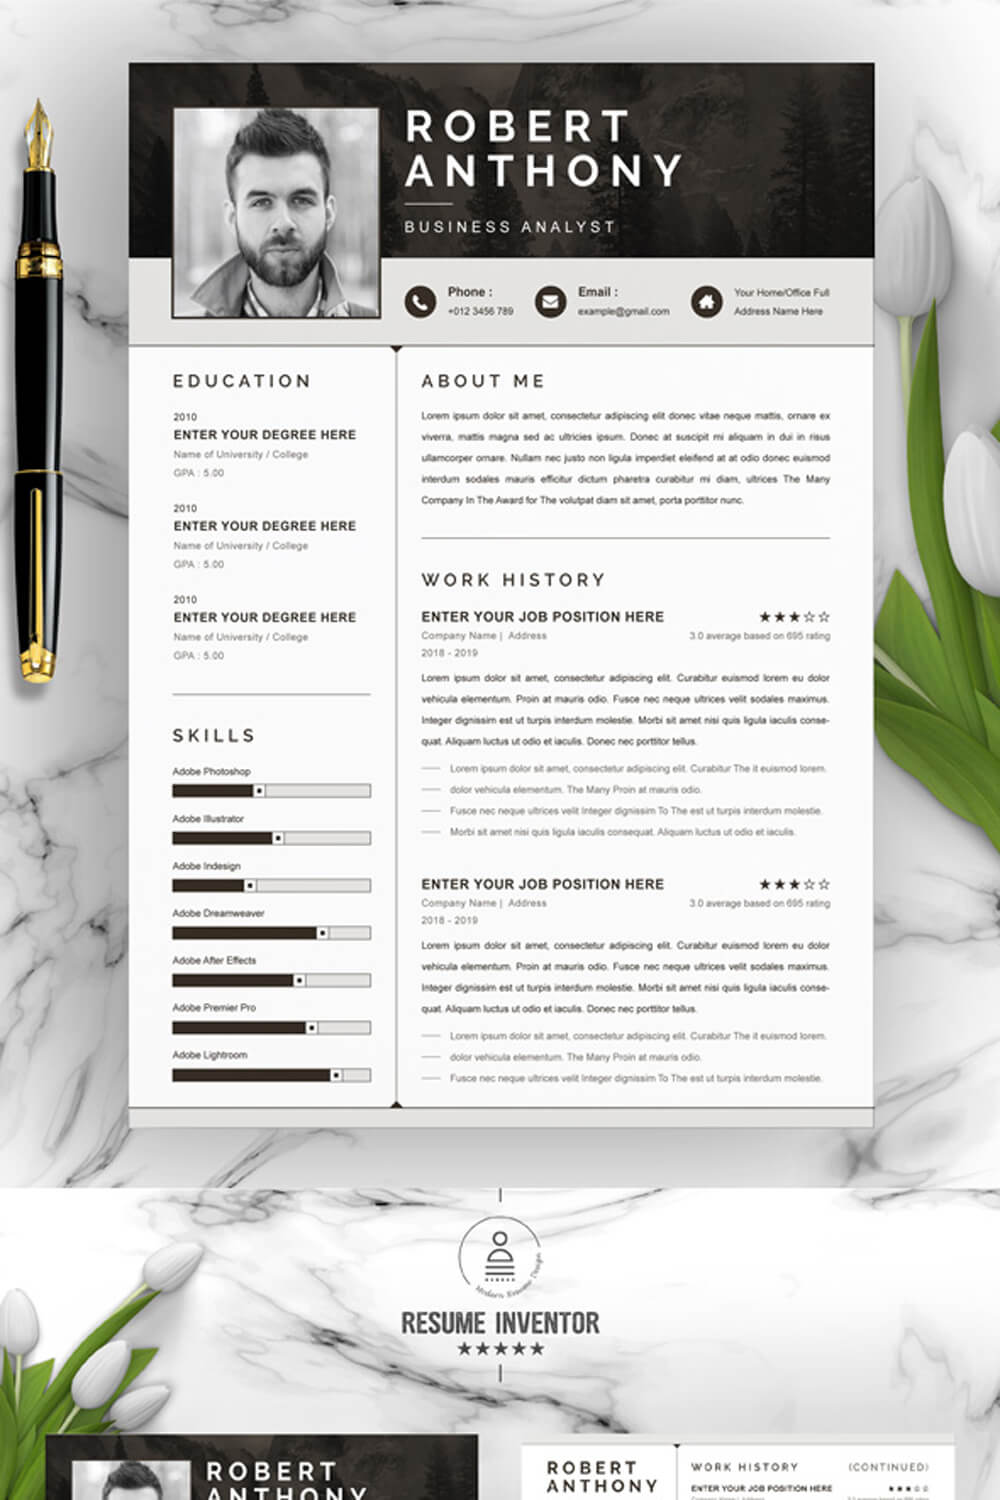 Business Analyst Resume Template | Resume Template in Word PSD Format pinterest preview image.